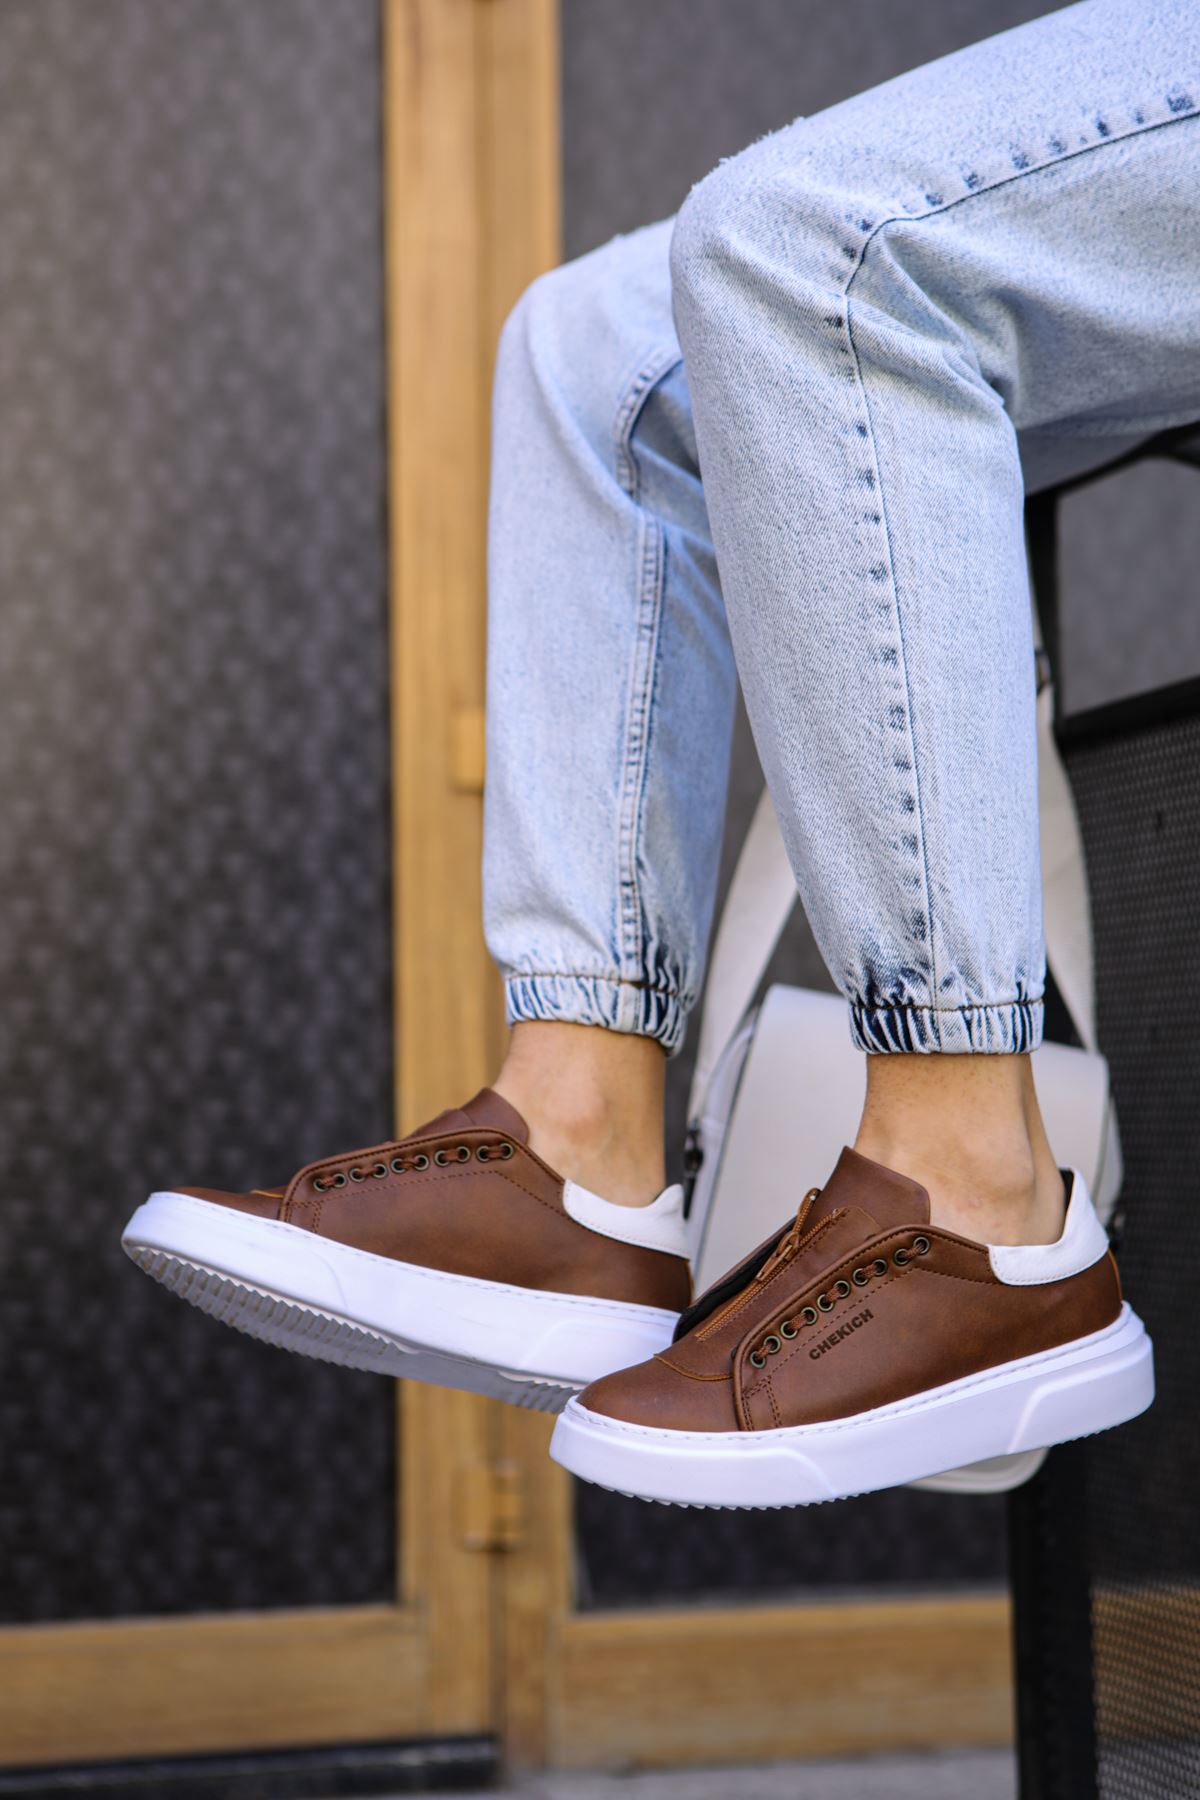 Chekich Men's Shoes Tan and White Sneakers Artificial Leather Spring Fall 2021 Season Zipper Casual Sport Original Vulcanized Breathable Lightweight Brown Sneakers Odorless Hot Sale Comfortable Footwear Hiking CH092 V1